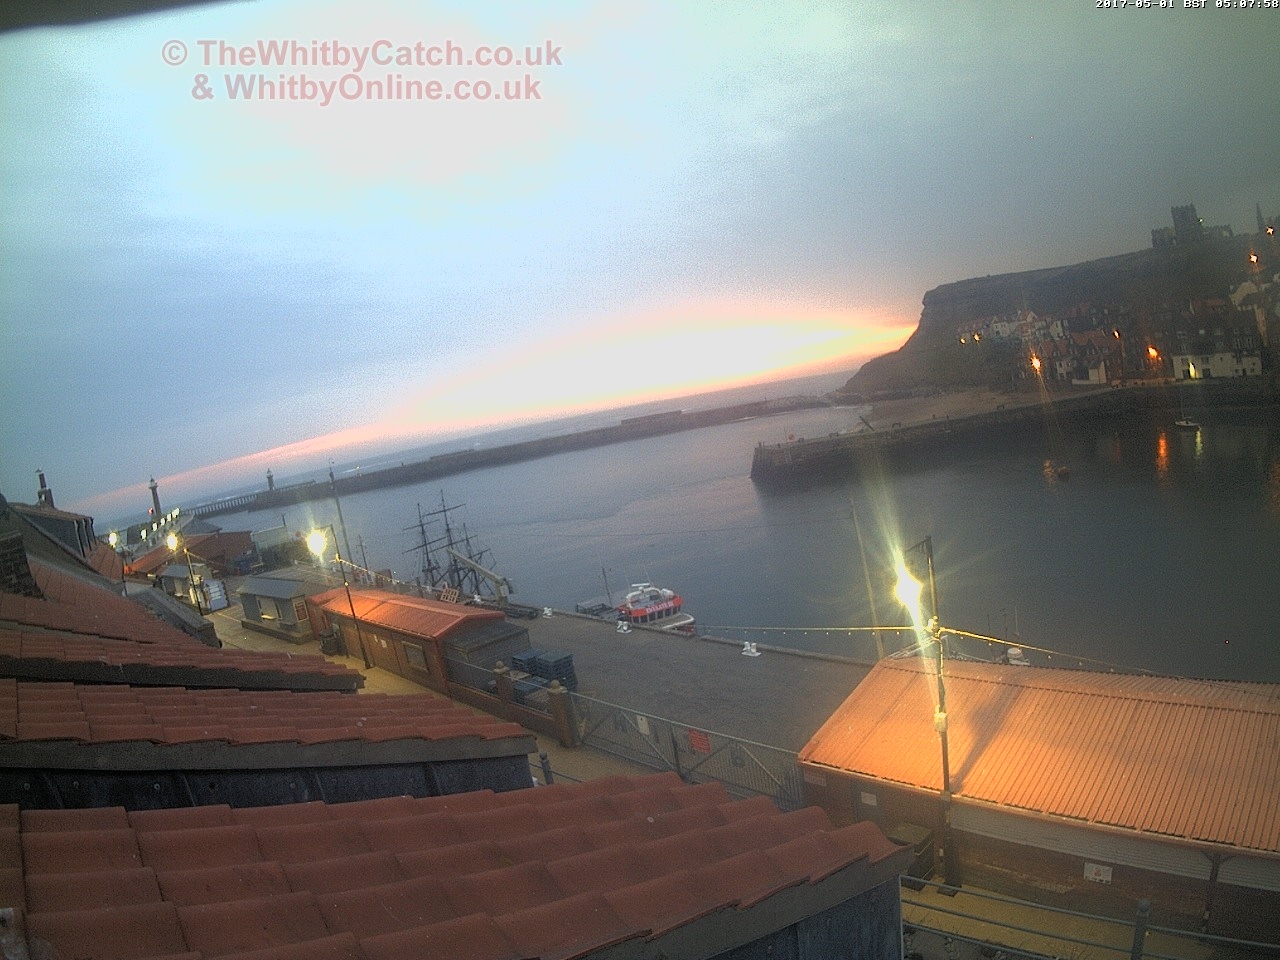 Whitby Mon 1st May 2017 05:08.